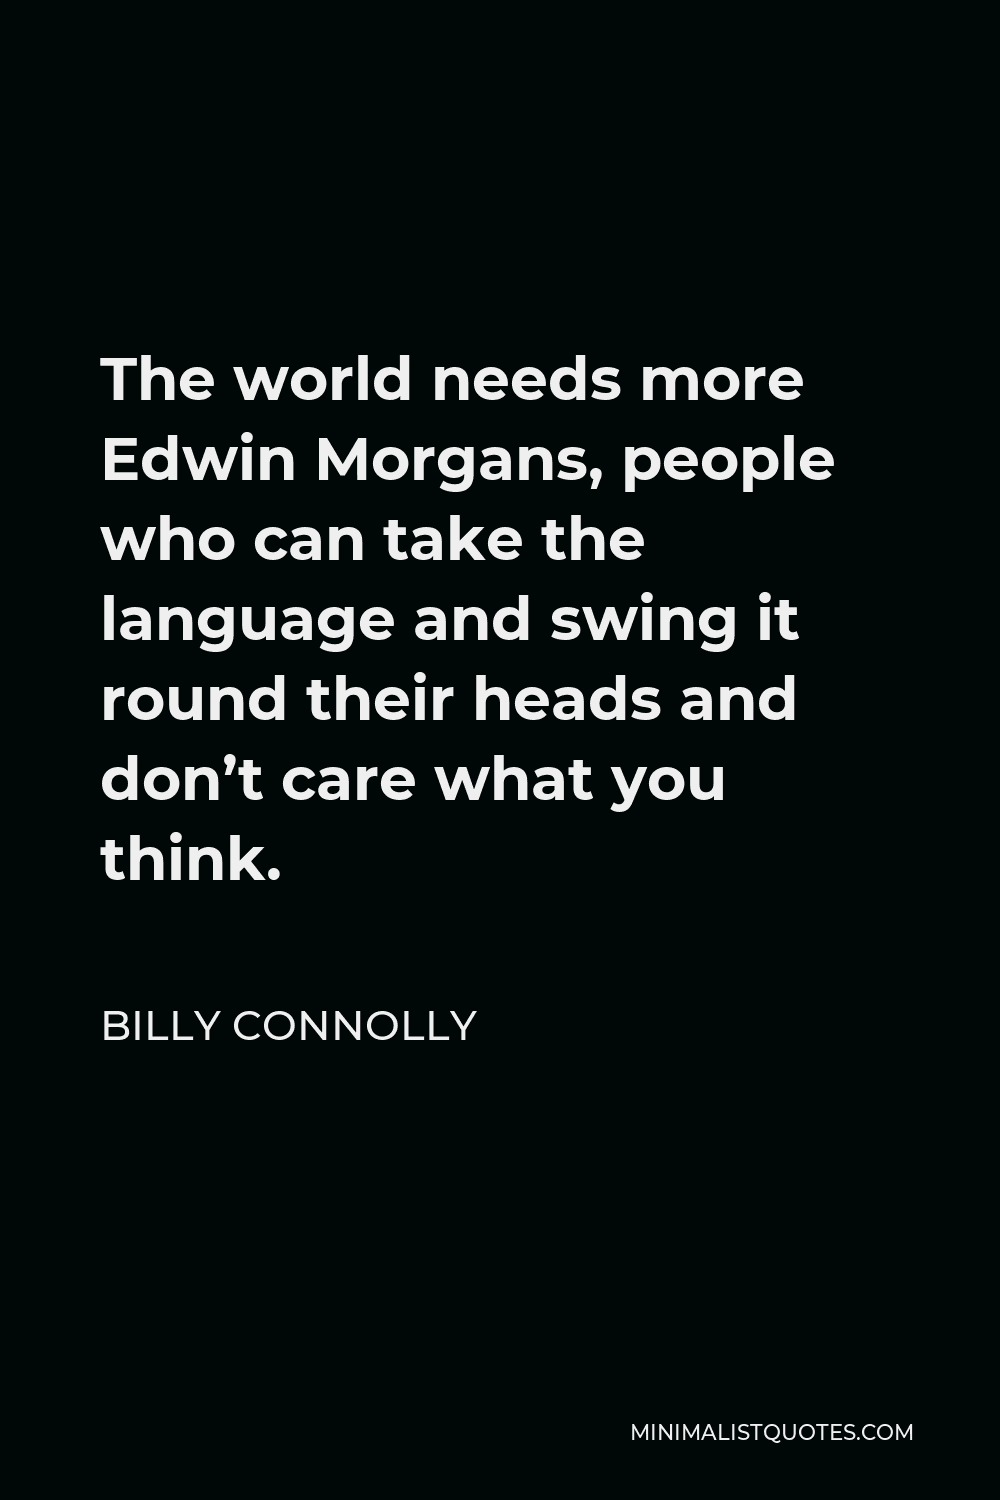 Billy Connolly Quote - The world needs more Edwin Morgans, people who can take the language and swing it round their heads and don’t care what you think.